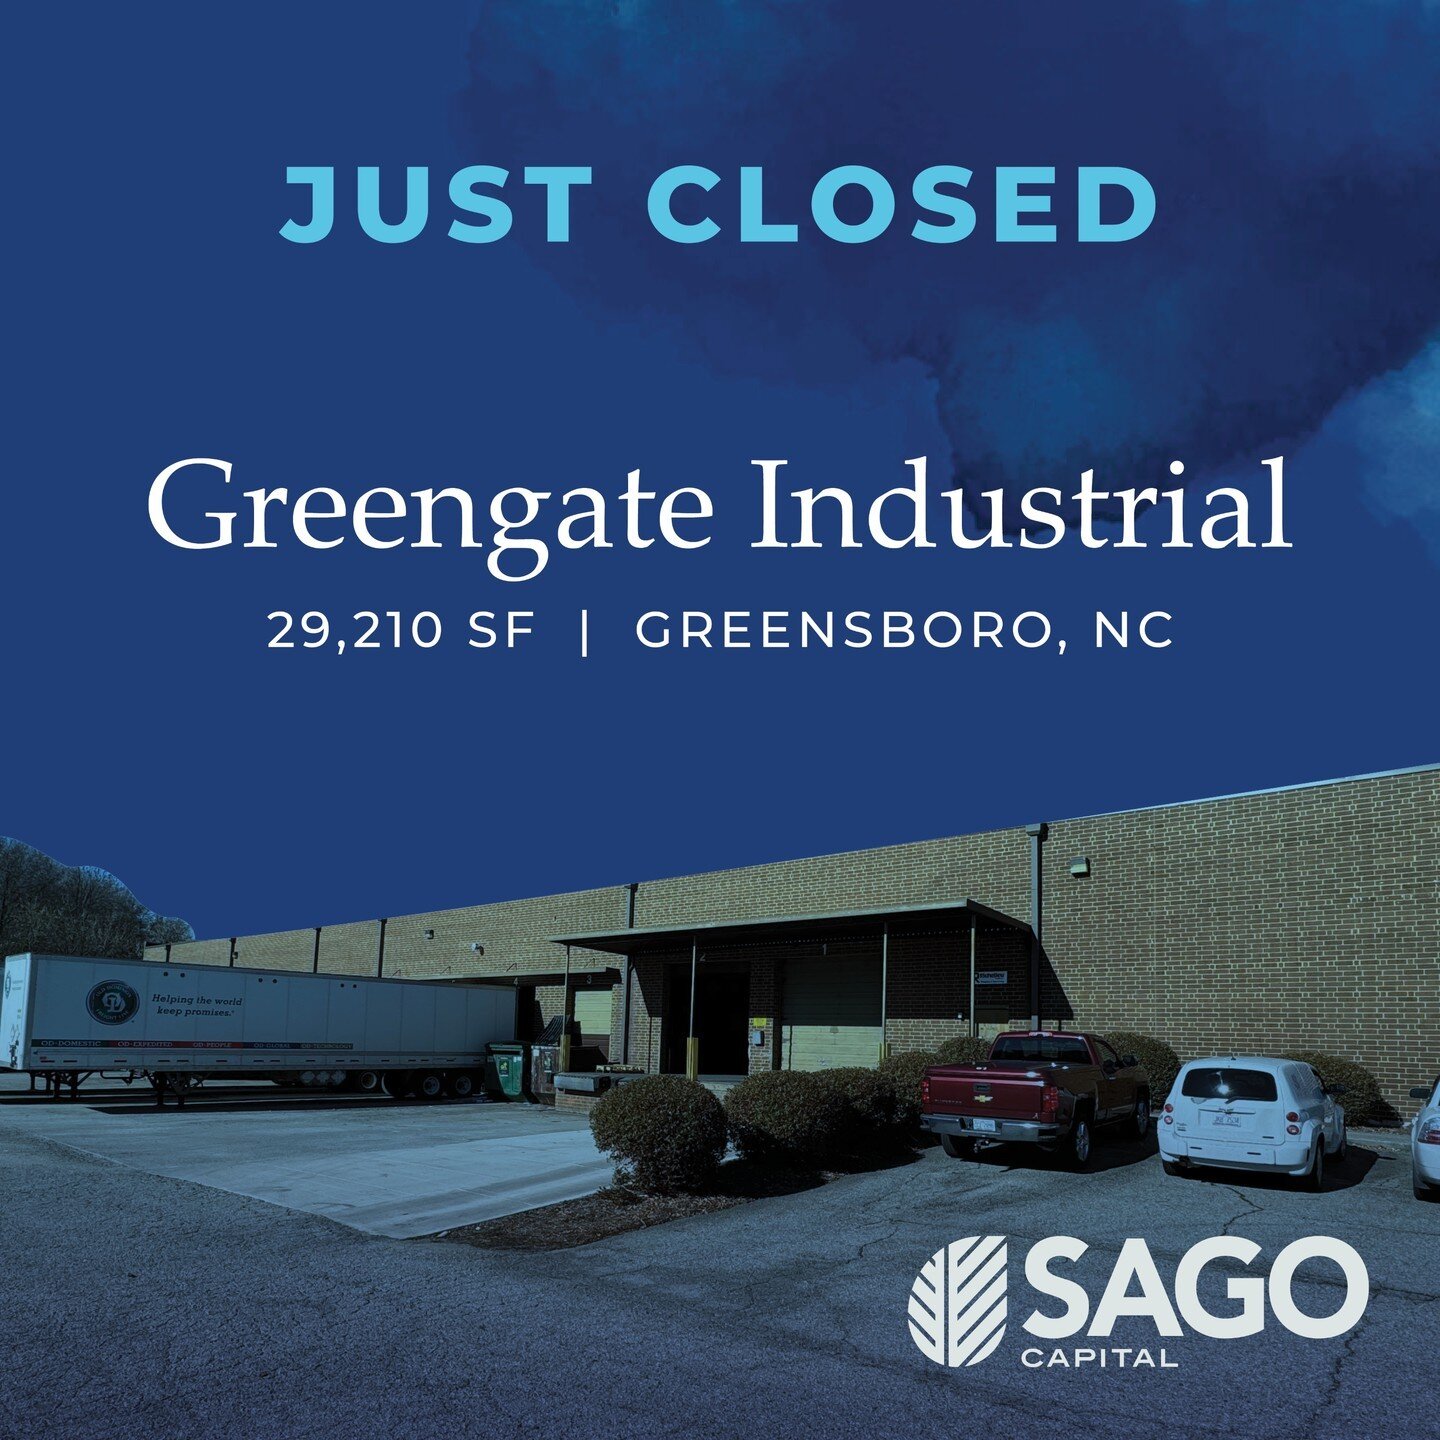 Sago recently closed on a the acquisition of a 29,210 sf single-tenant industrial warehouse in Greensboro, North Carolina. This asset is 100% leased to a multi-national, publicly traded tenant.